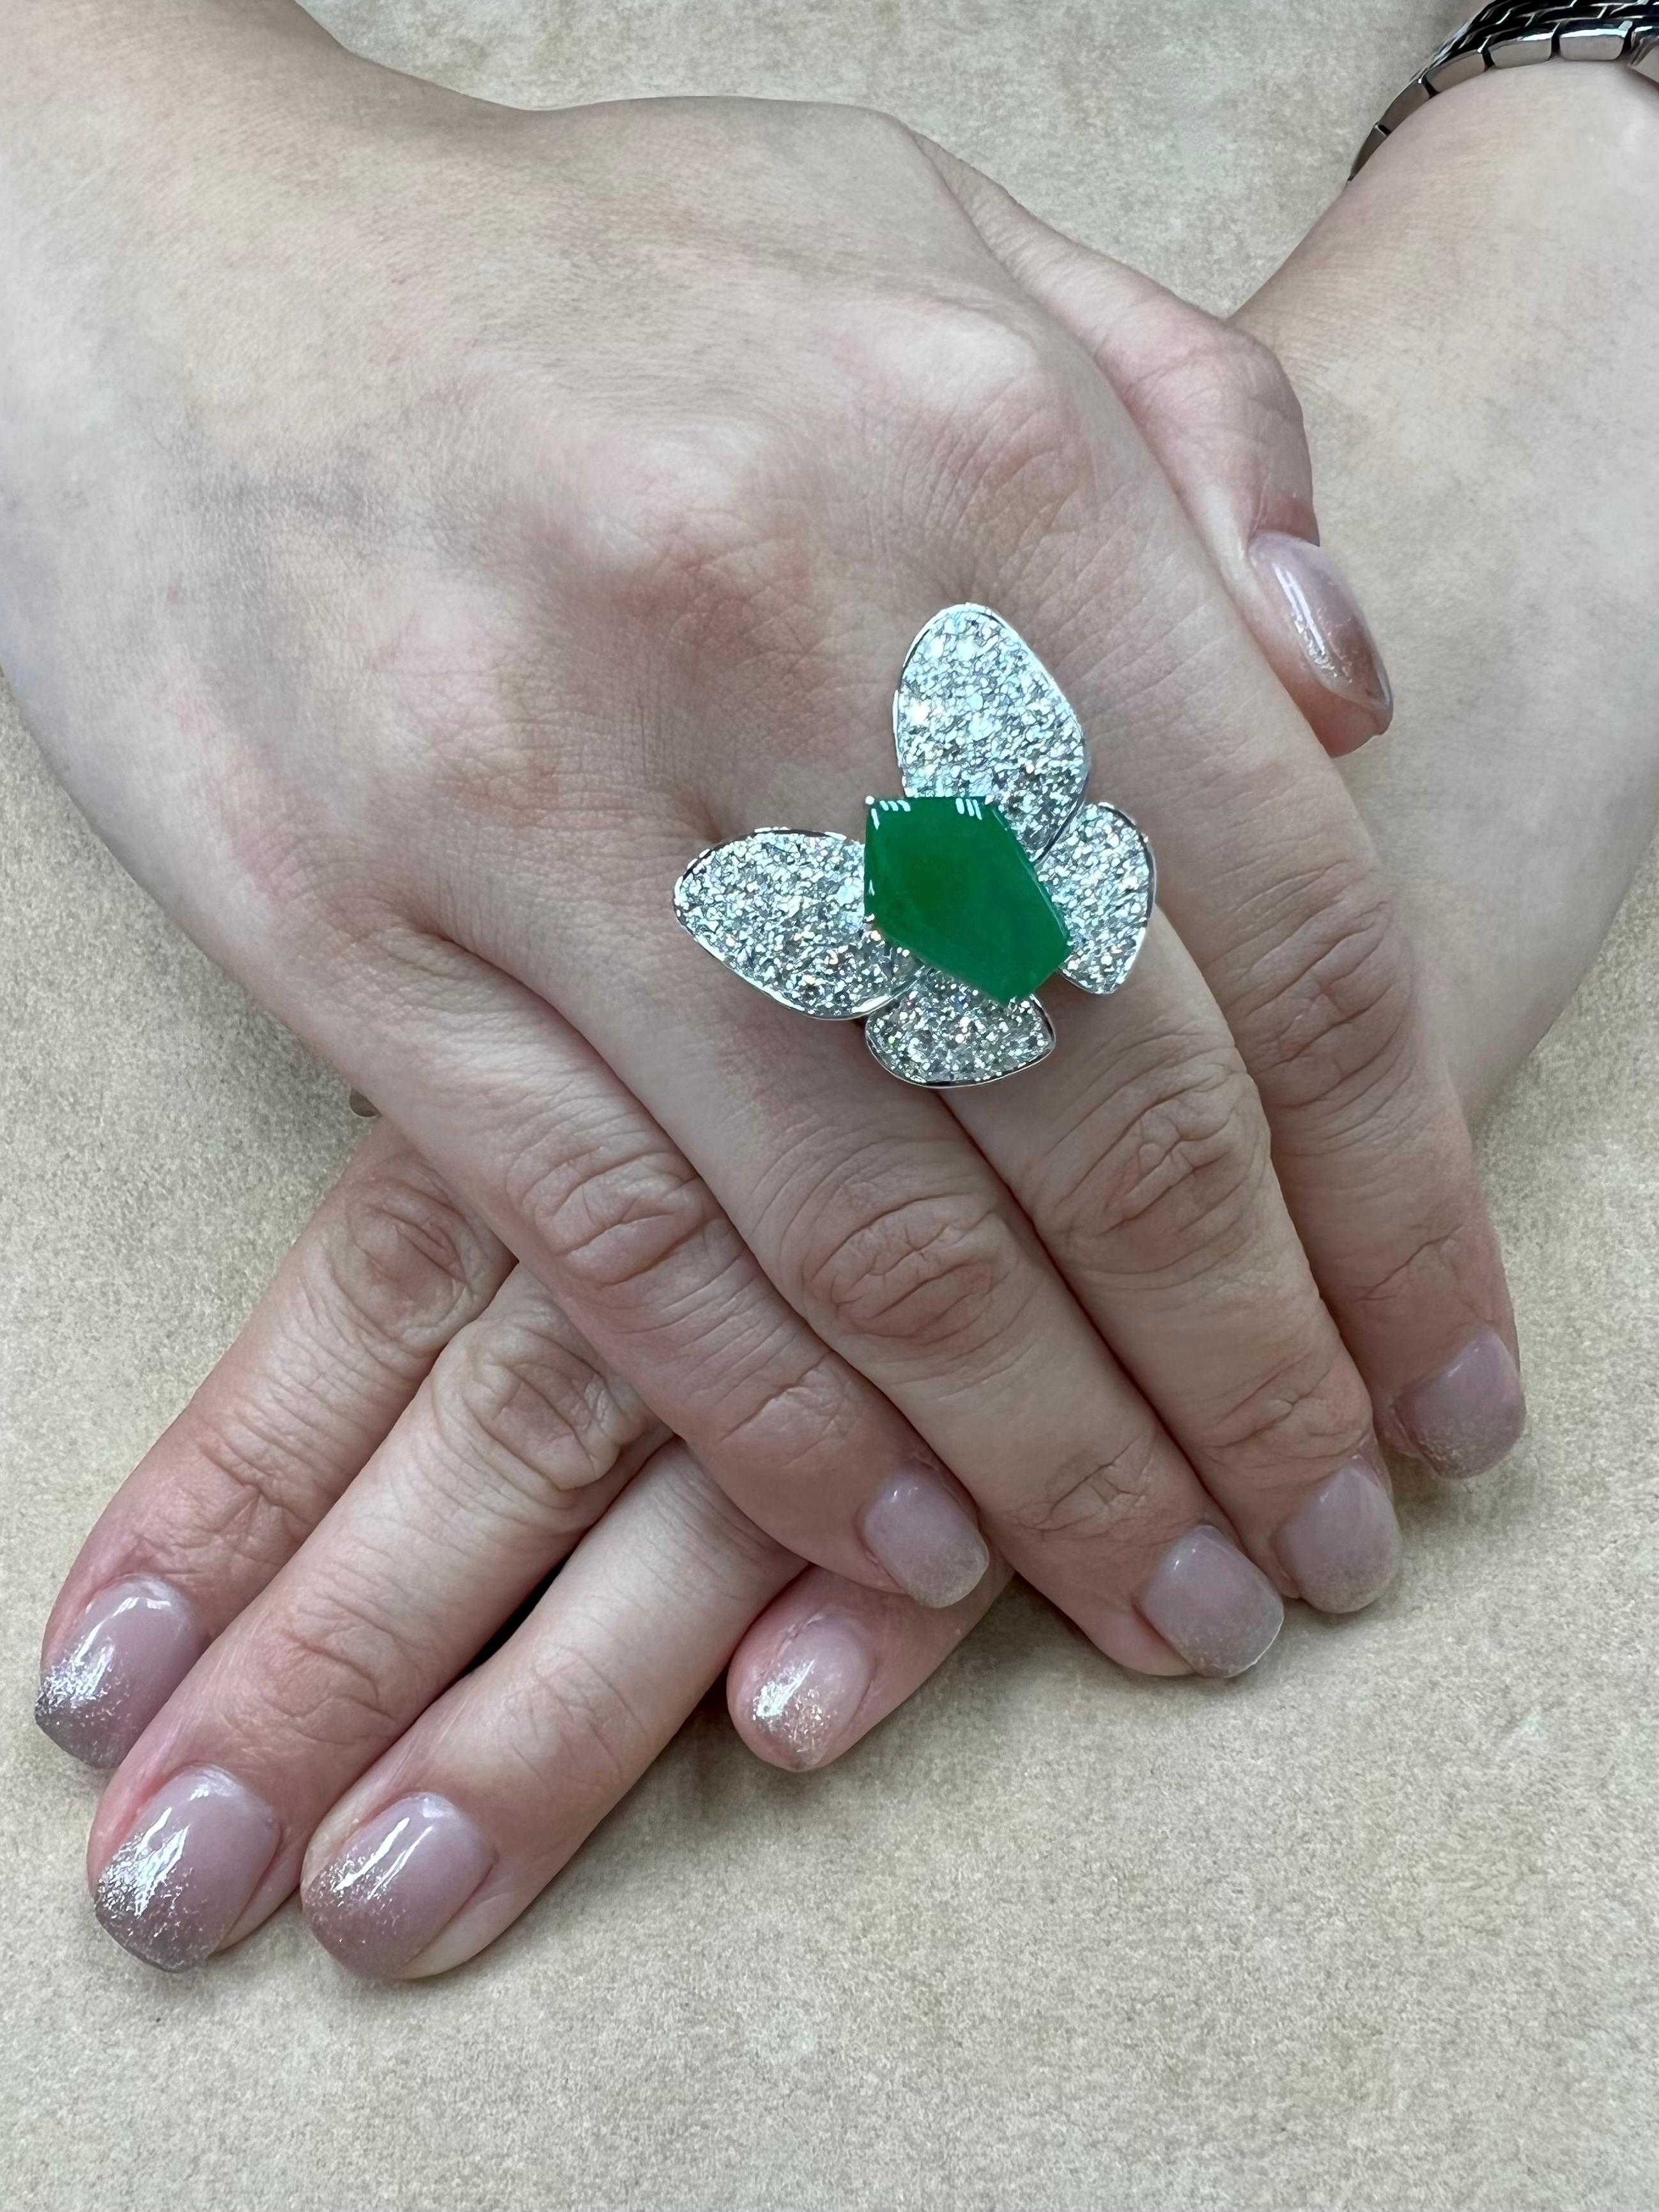 Please check out the HD video. This apple green jadeite jade butterfly ring is spectacular! It a big statement piece. This ring is certified natural jadeite jade (4.32cts) with no treatments or enhancements. The ring is set in 18k white gold. There